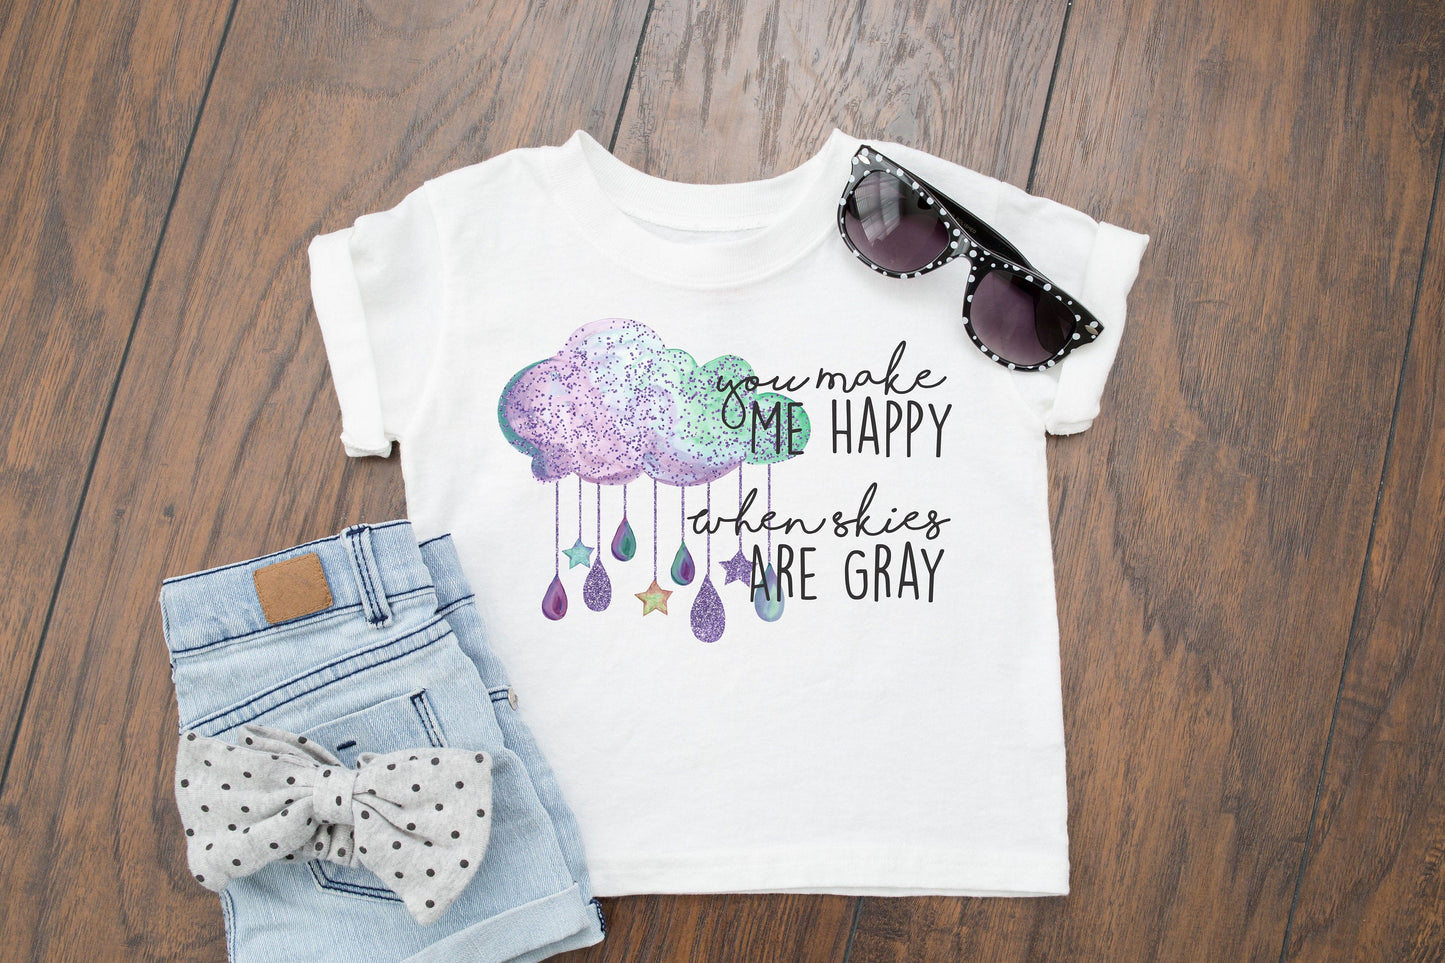 You Make Me Happy When Skies Are Gray Infant or Toddler Shirt or Bodysuit - Rainbow Baby - Storm Cloud Toddler Shirt